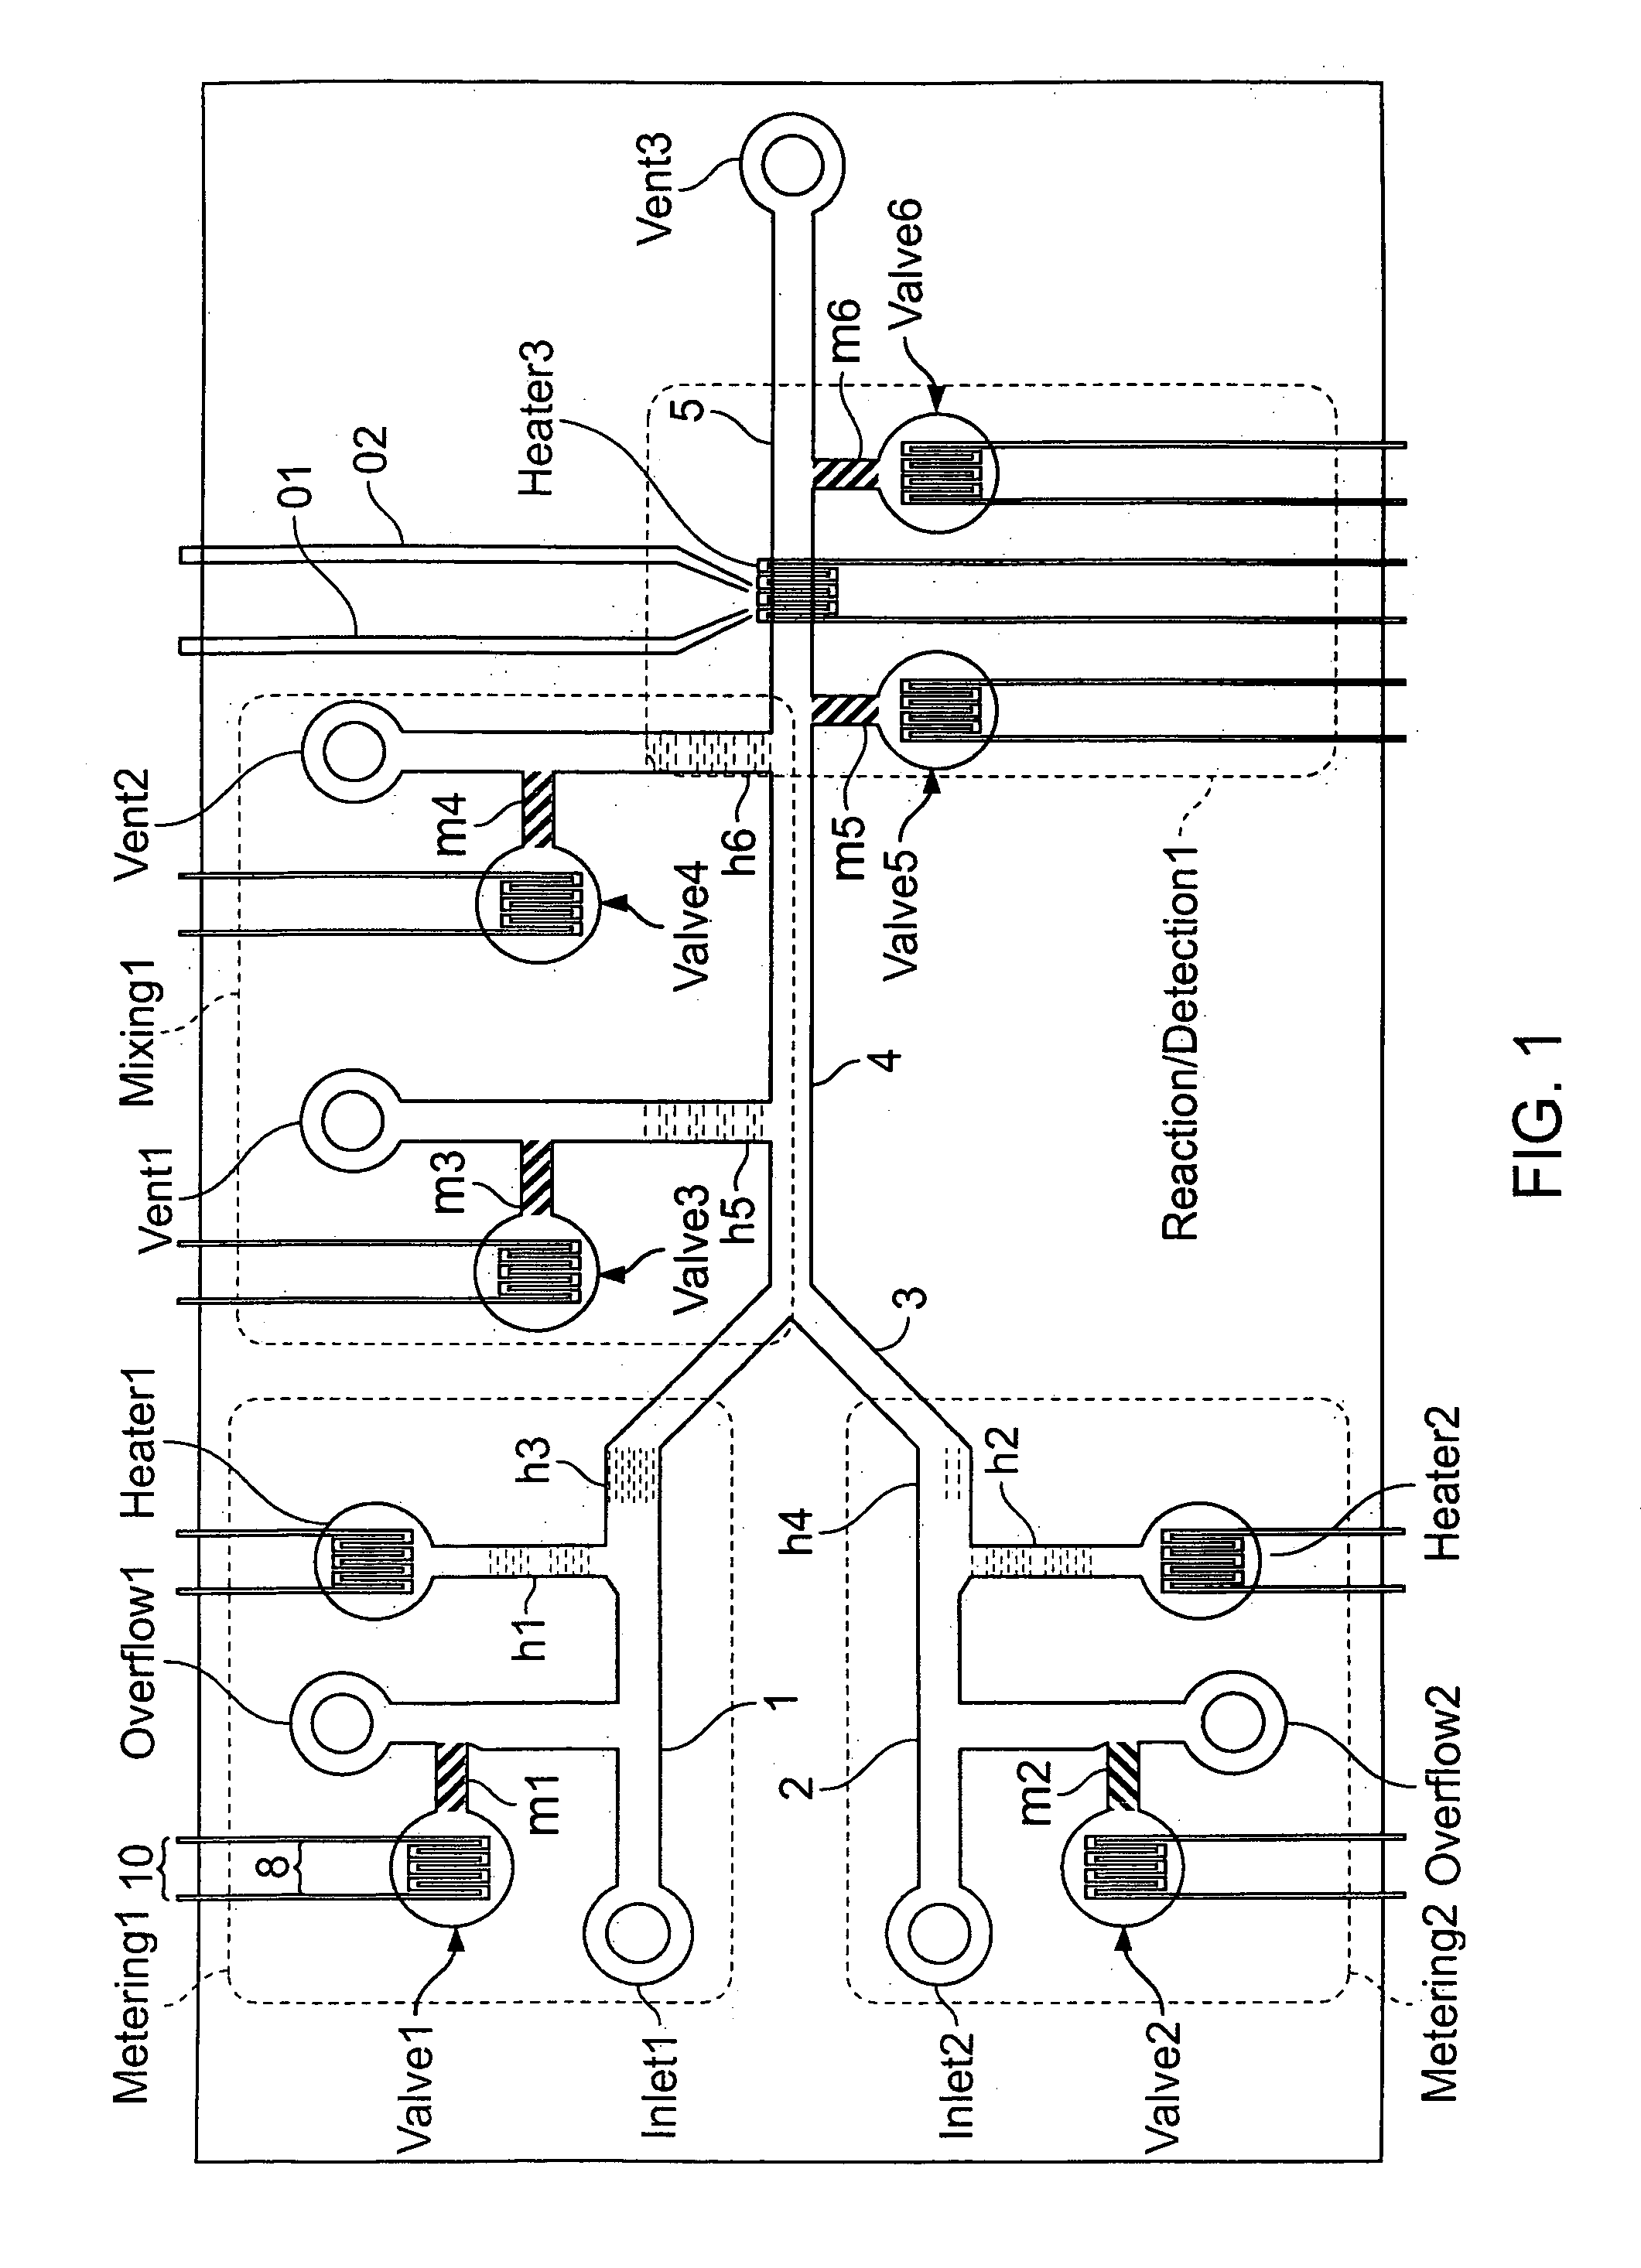 Methods and systems for control of microfluidic devices